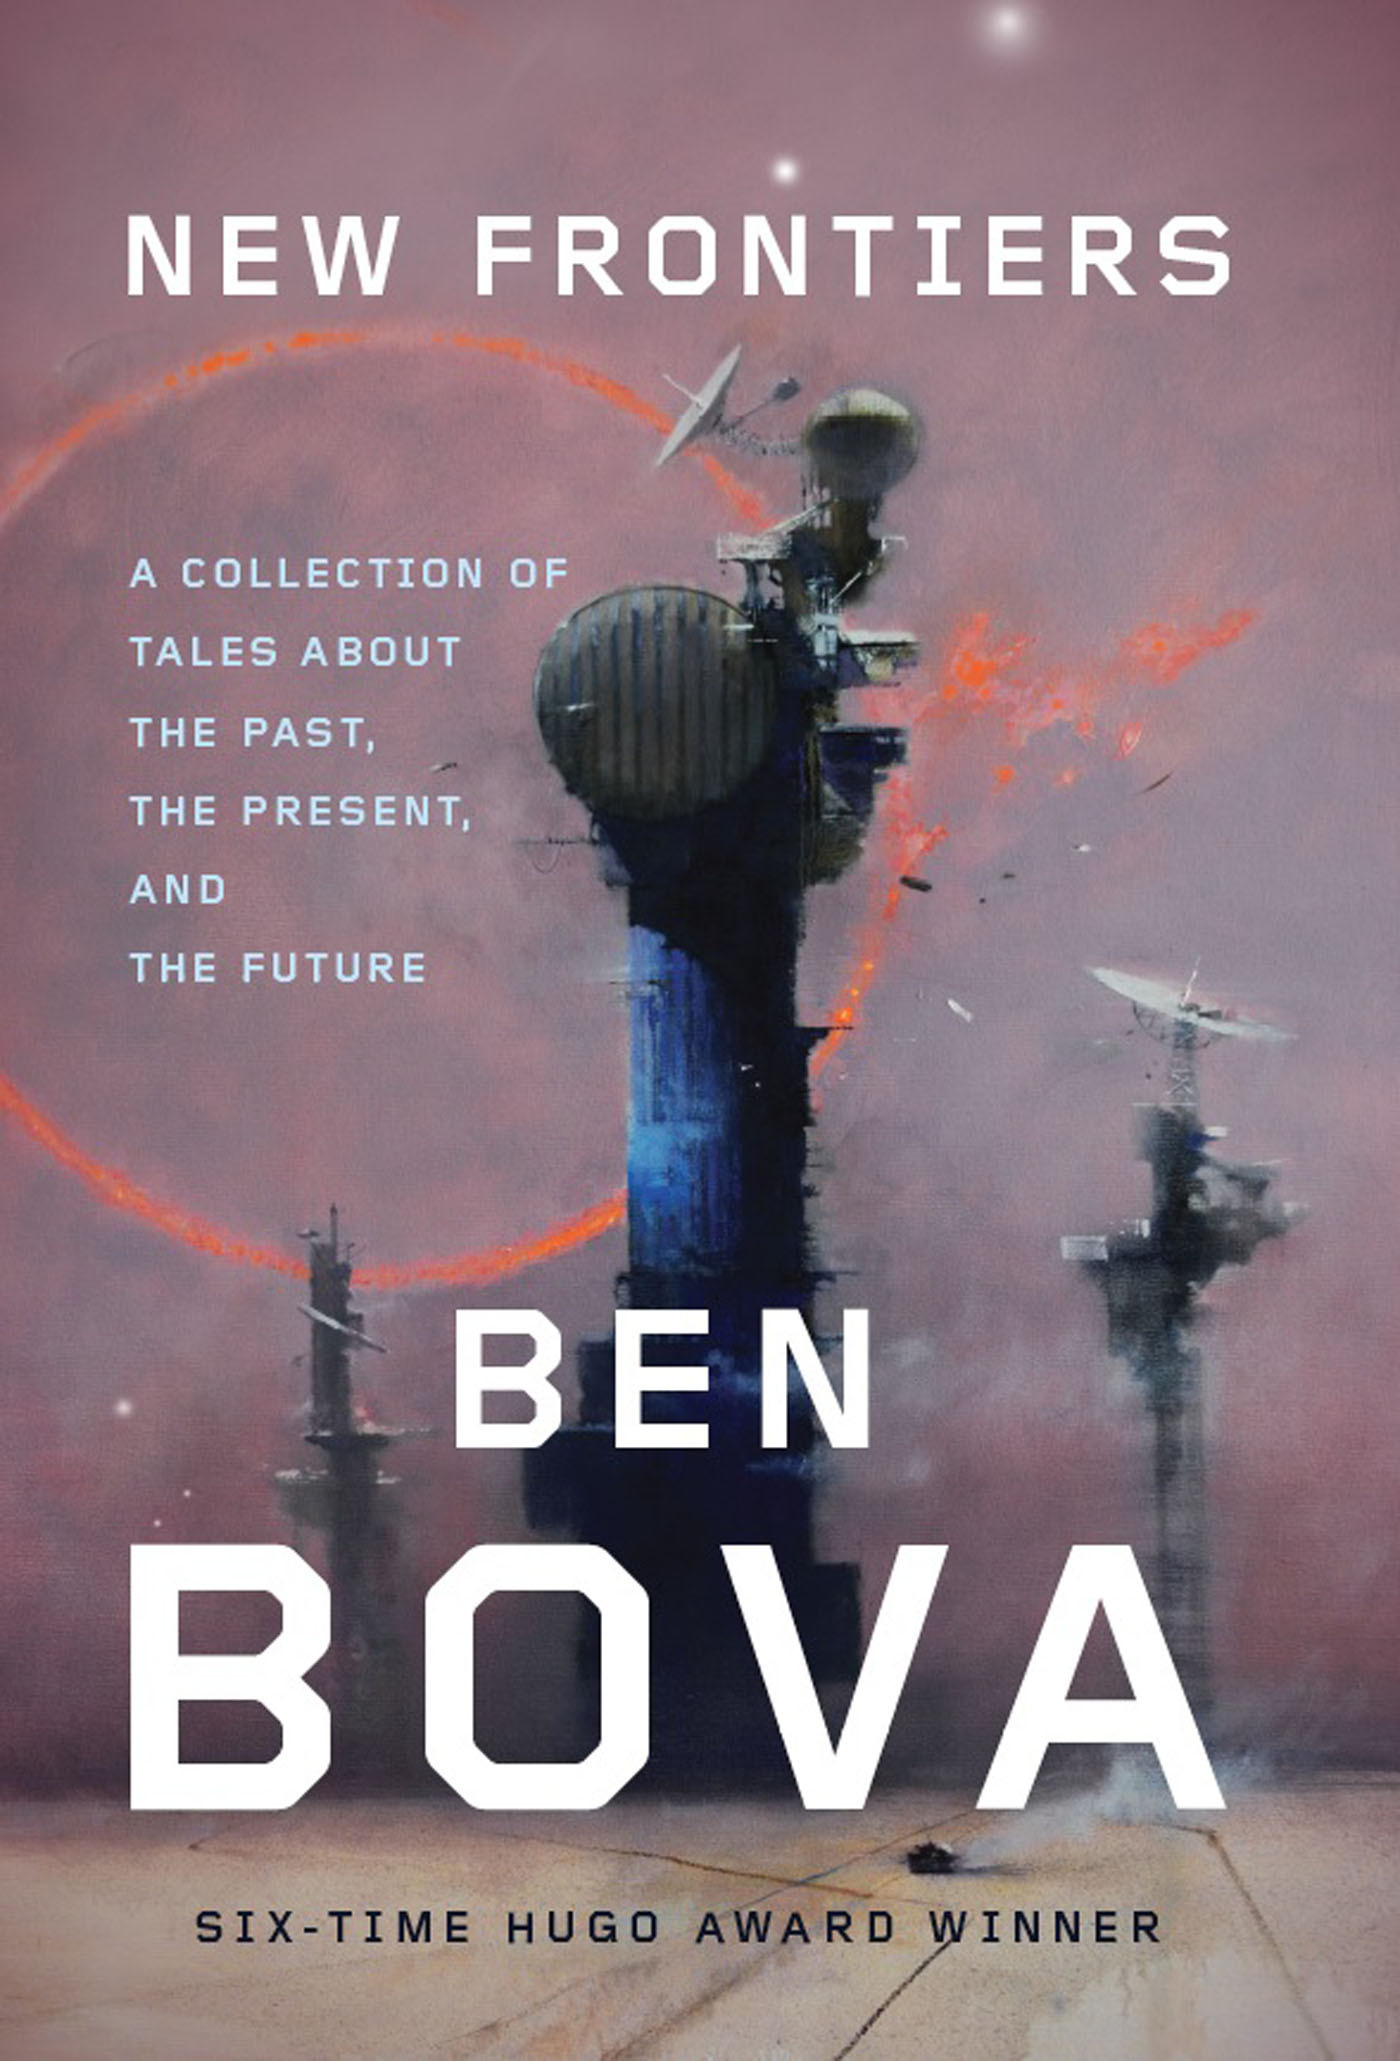 New Frontiers : A Collection of Tales About the Past, the Present, and the Future by Ben Bova